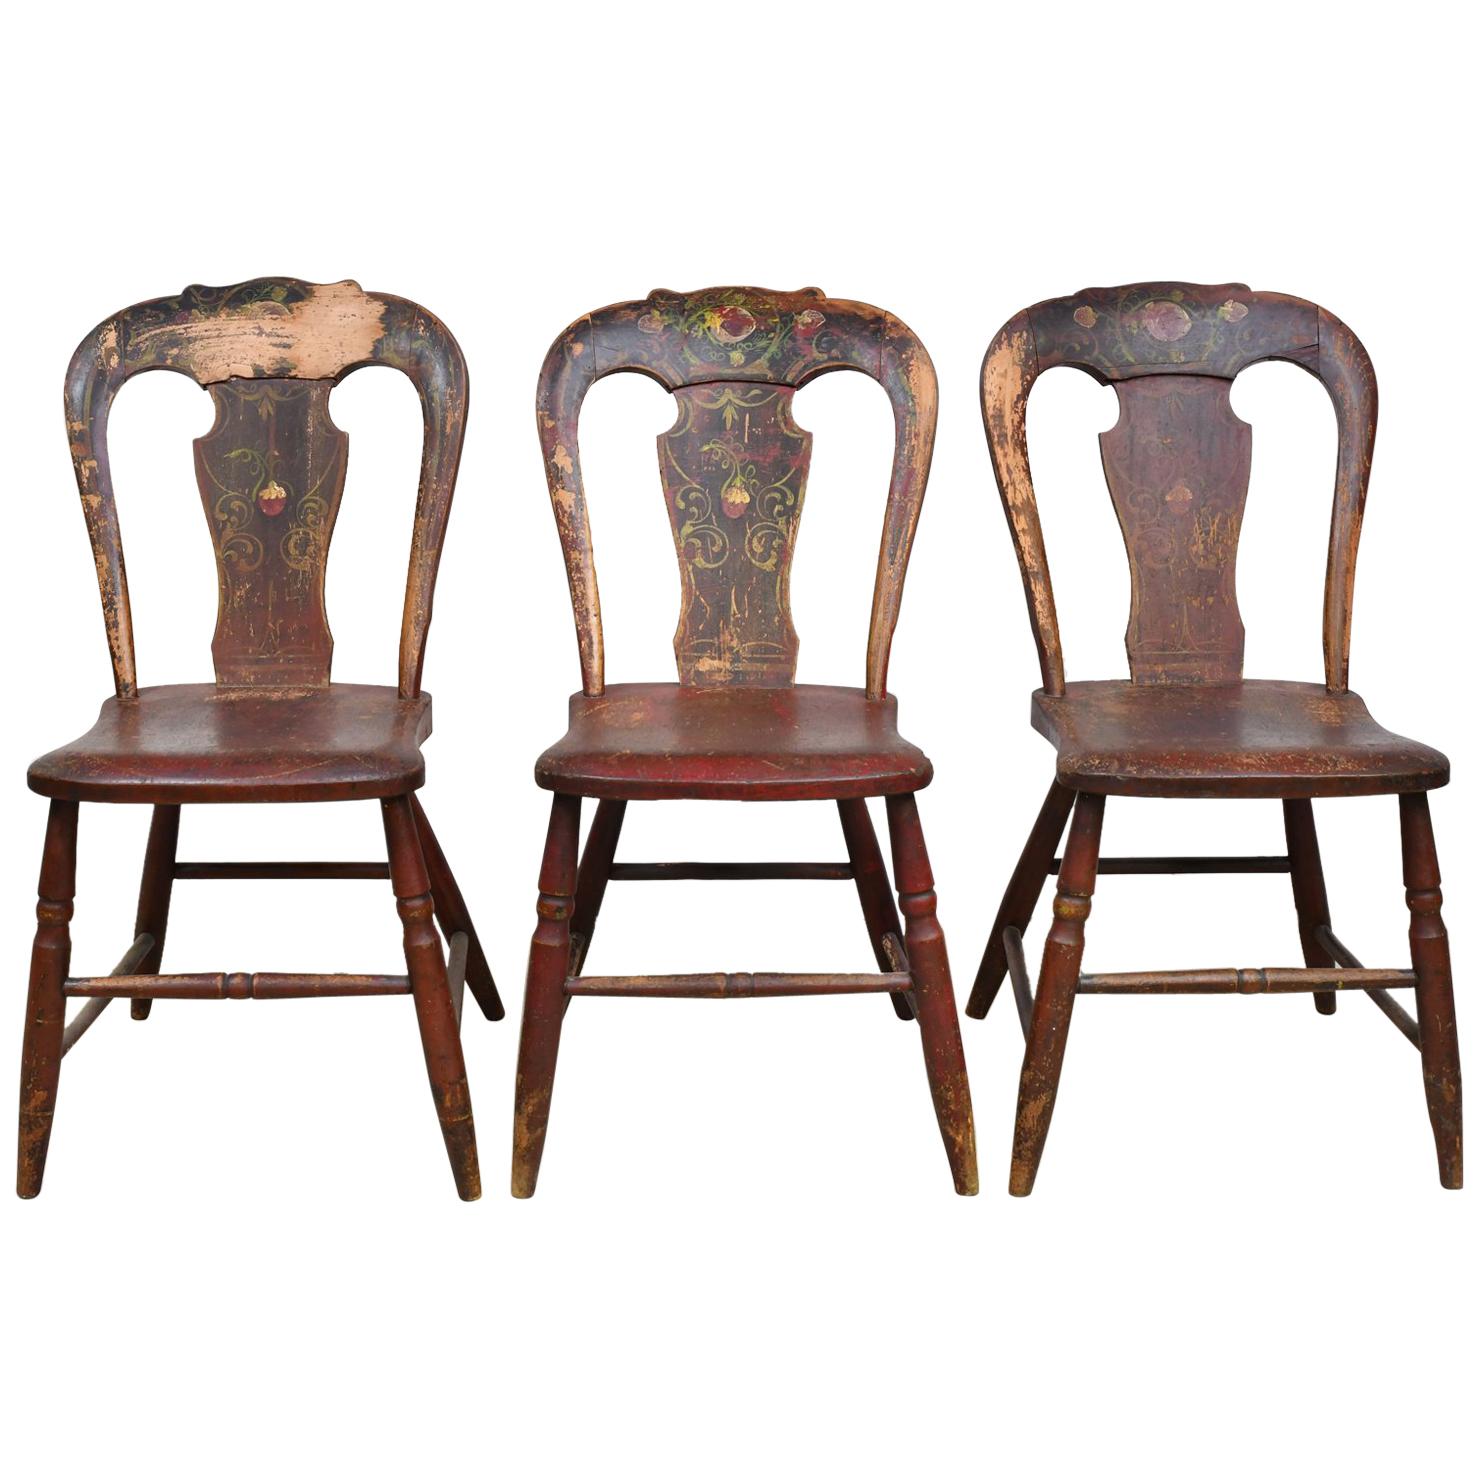 Set of 3 Authentic Plank Chairs with Red/Brown Paint, Pennsylvania, circa 1840